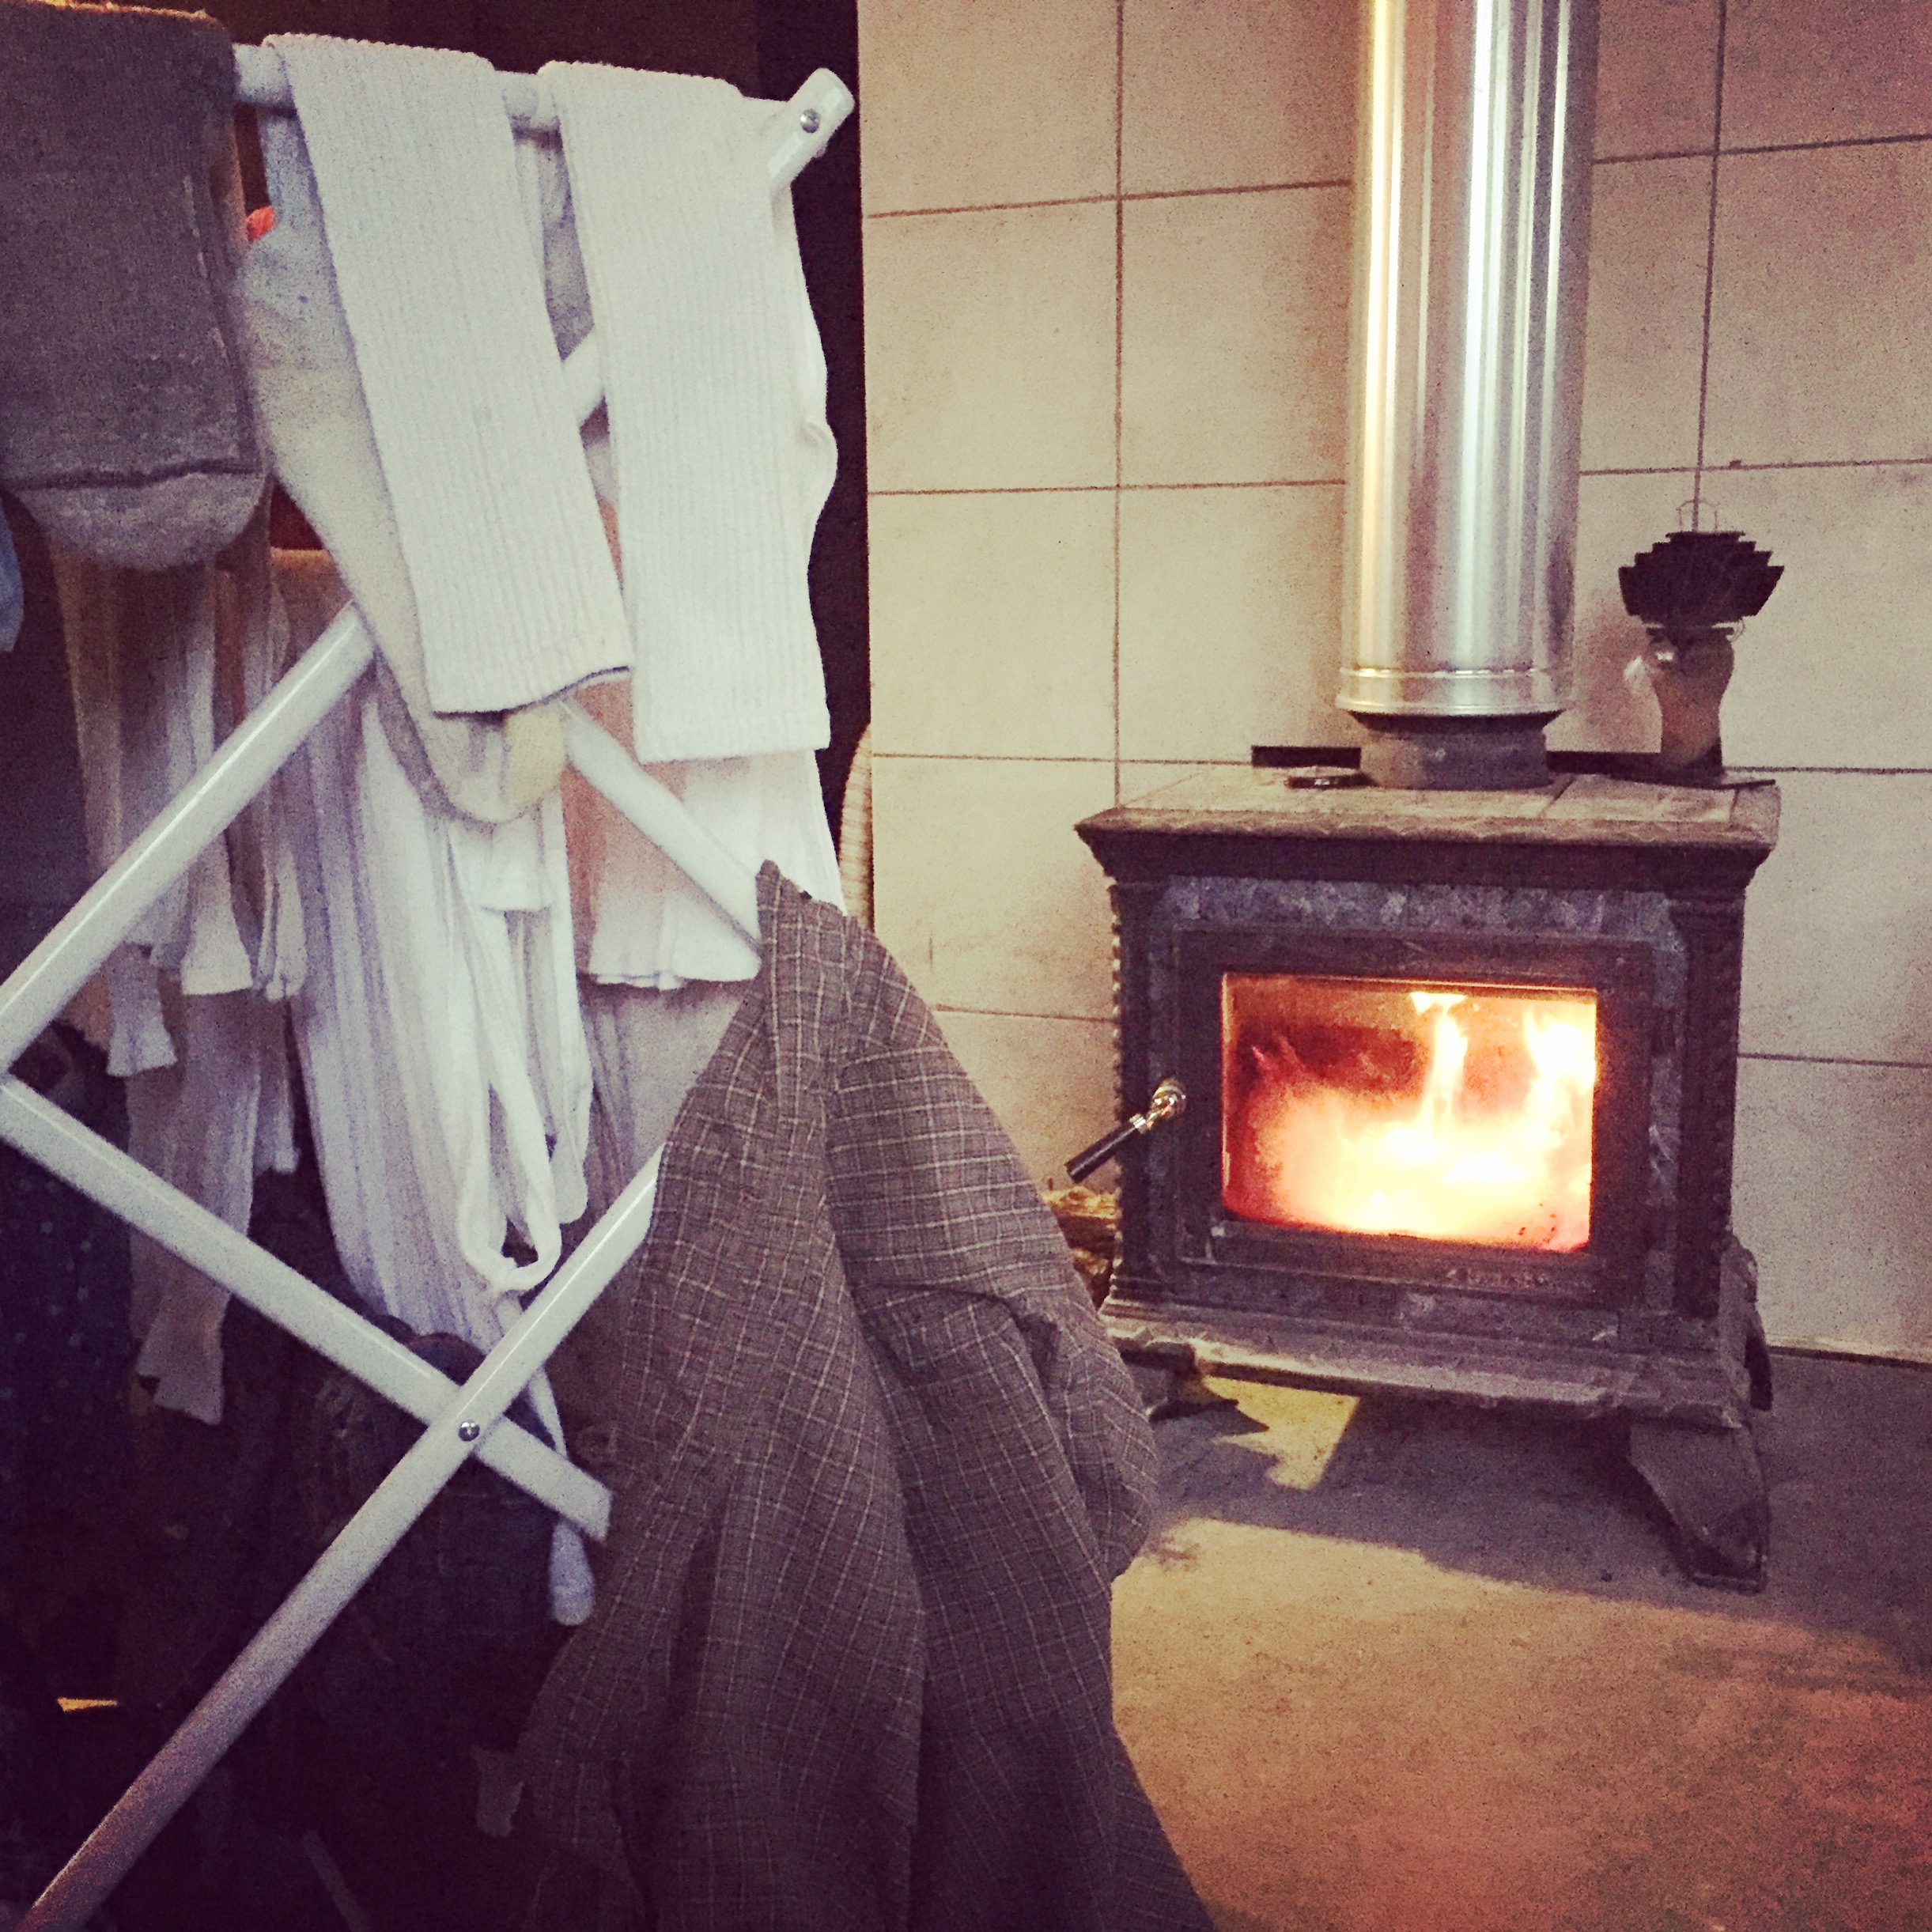 Air drying our clothes by the woodstove is just one way we save power off grid in the winter. What else do we do living with off grid solar?